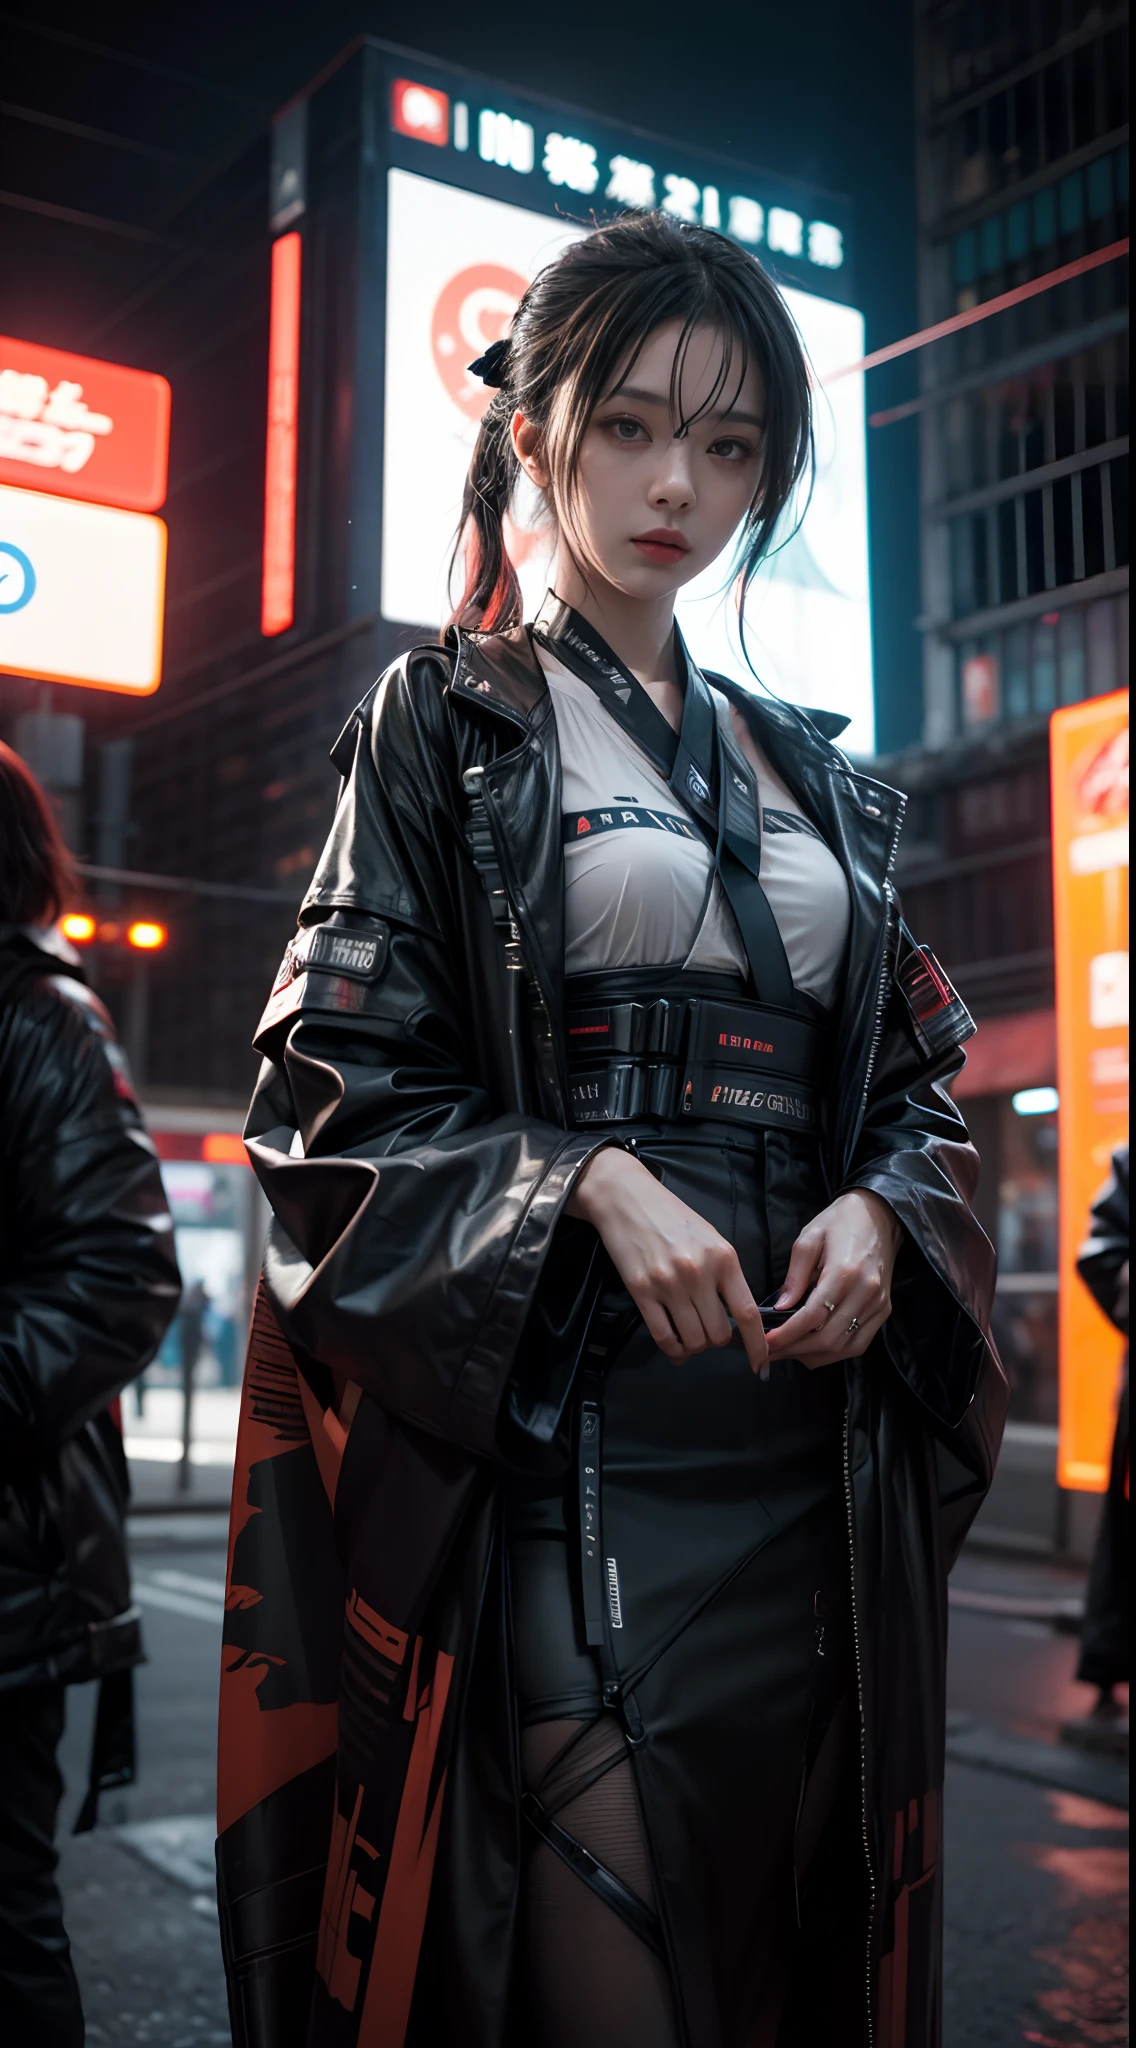 A photo of a woman immersed in a futuristic cyberpunk world while cosplaying in a high-tech kimono, captured at night with neon lights, using a mirrorless camera with a wide-angle lens, and an edgy cyberpunk photography style.